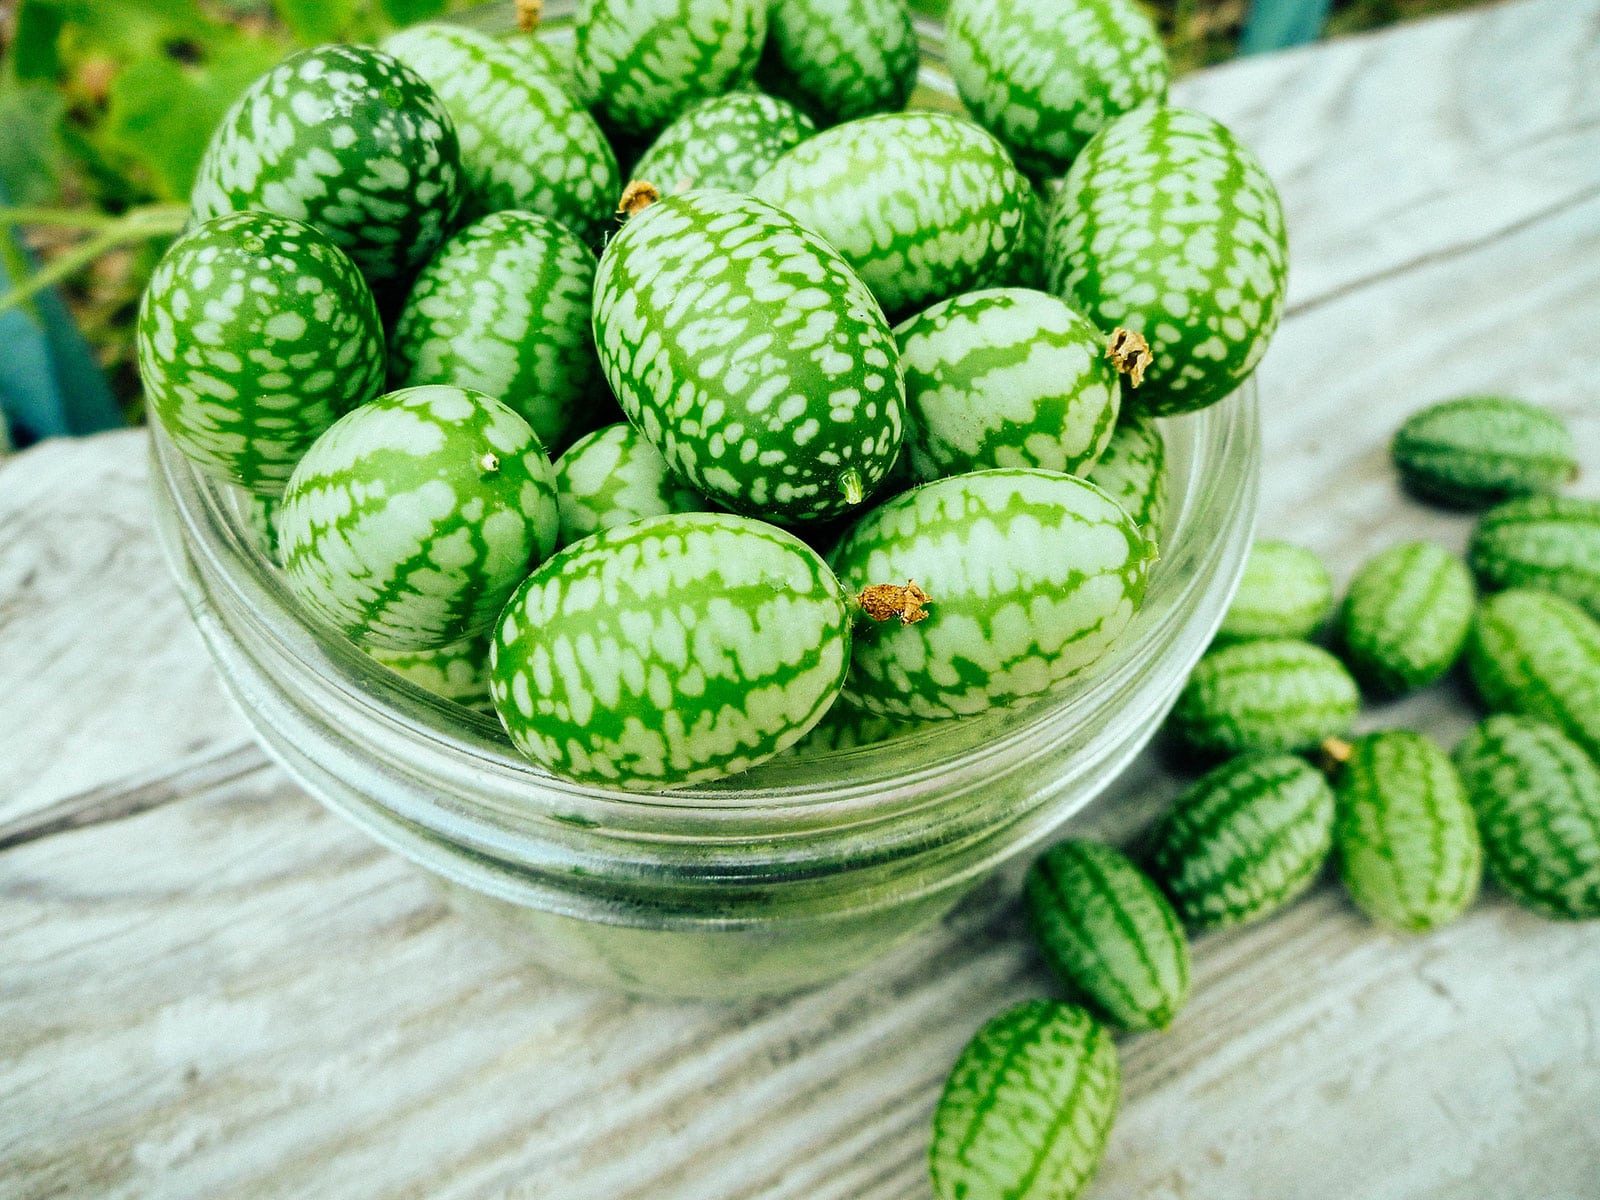 A half-pint sized jar overflowing with freshly harvested Mexican sour gherkins